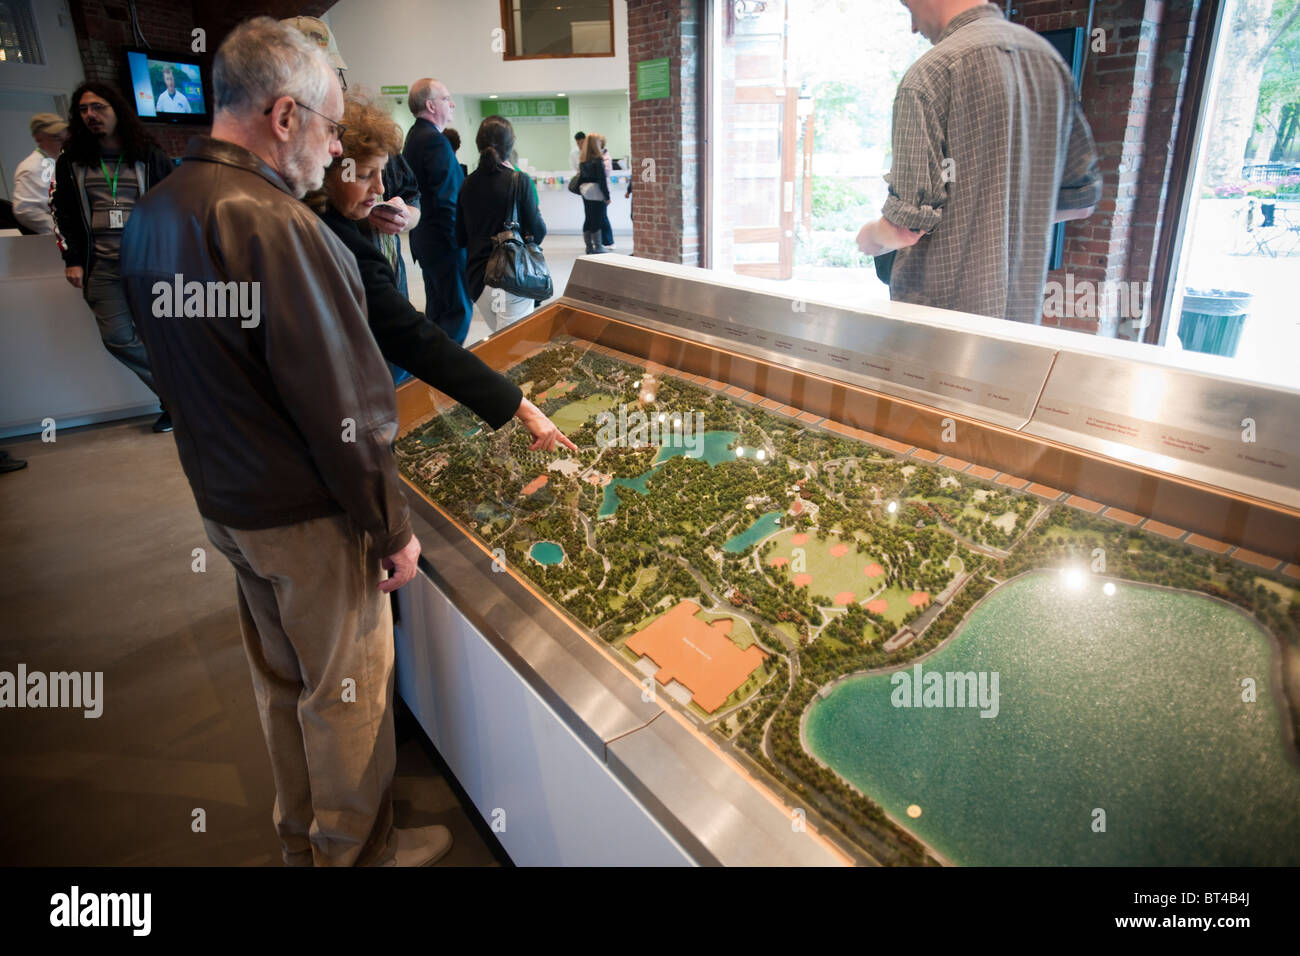 The Tavern on the Green Visitors Center opens in Central Park in New York Stock Photo